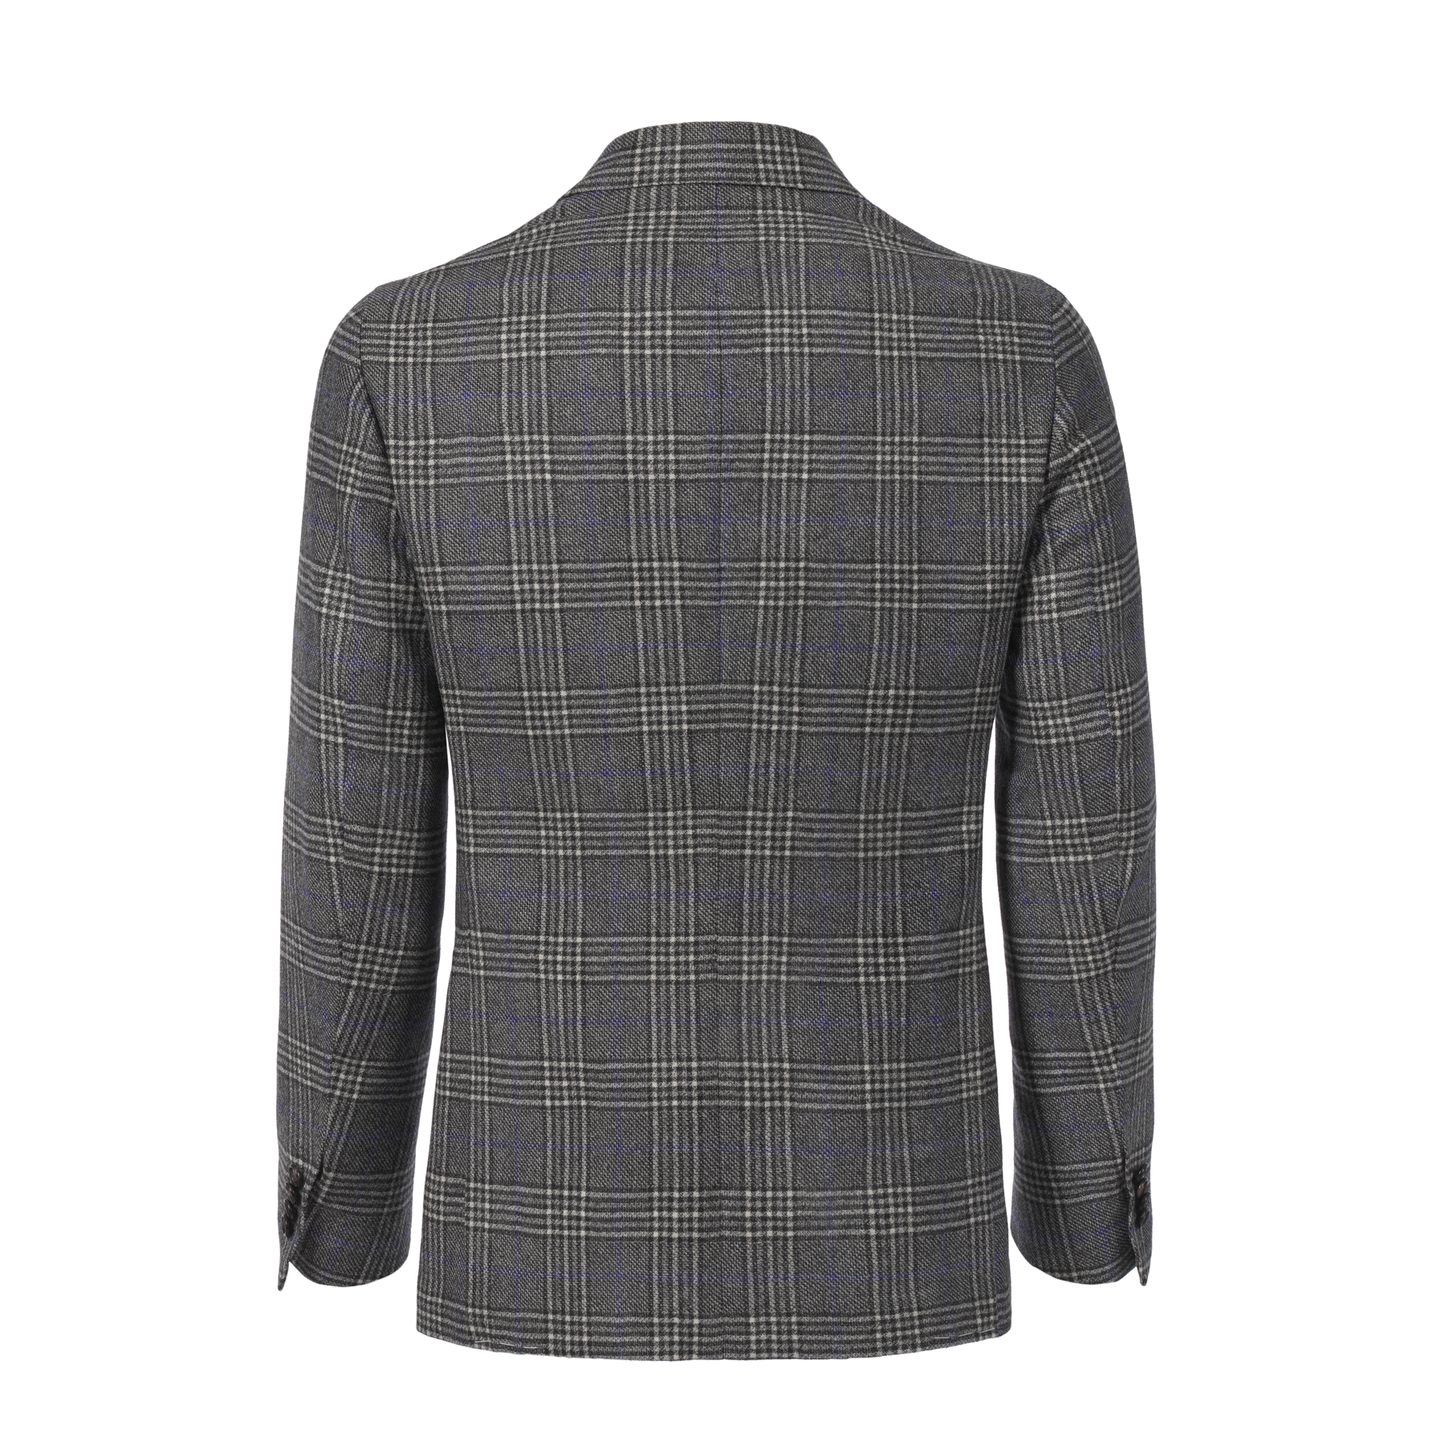 De Petrillo Single-Breasted Glencheck Virgin Wool Jacket in Grey. Exclusively Made for Sartale - SARTALE